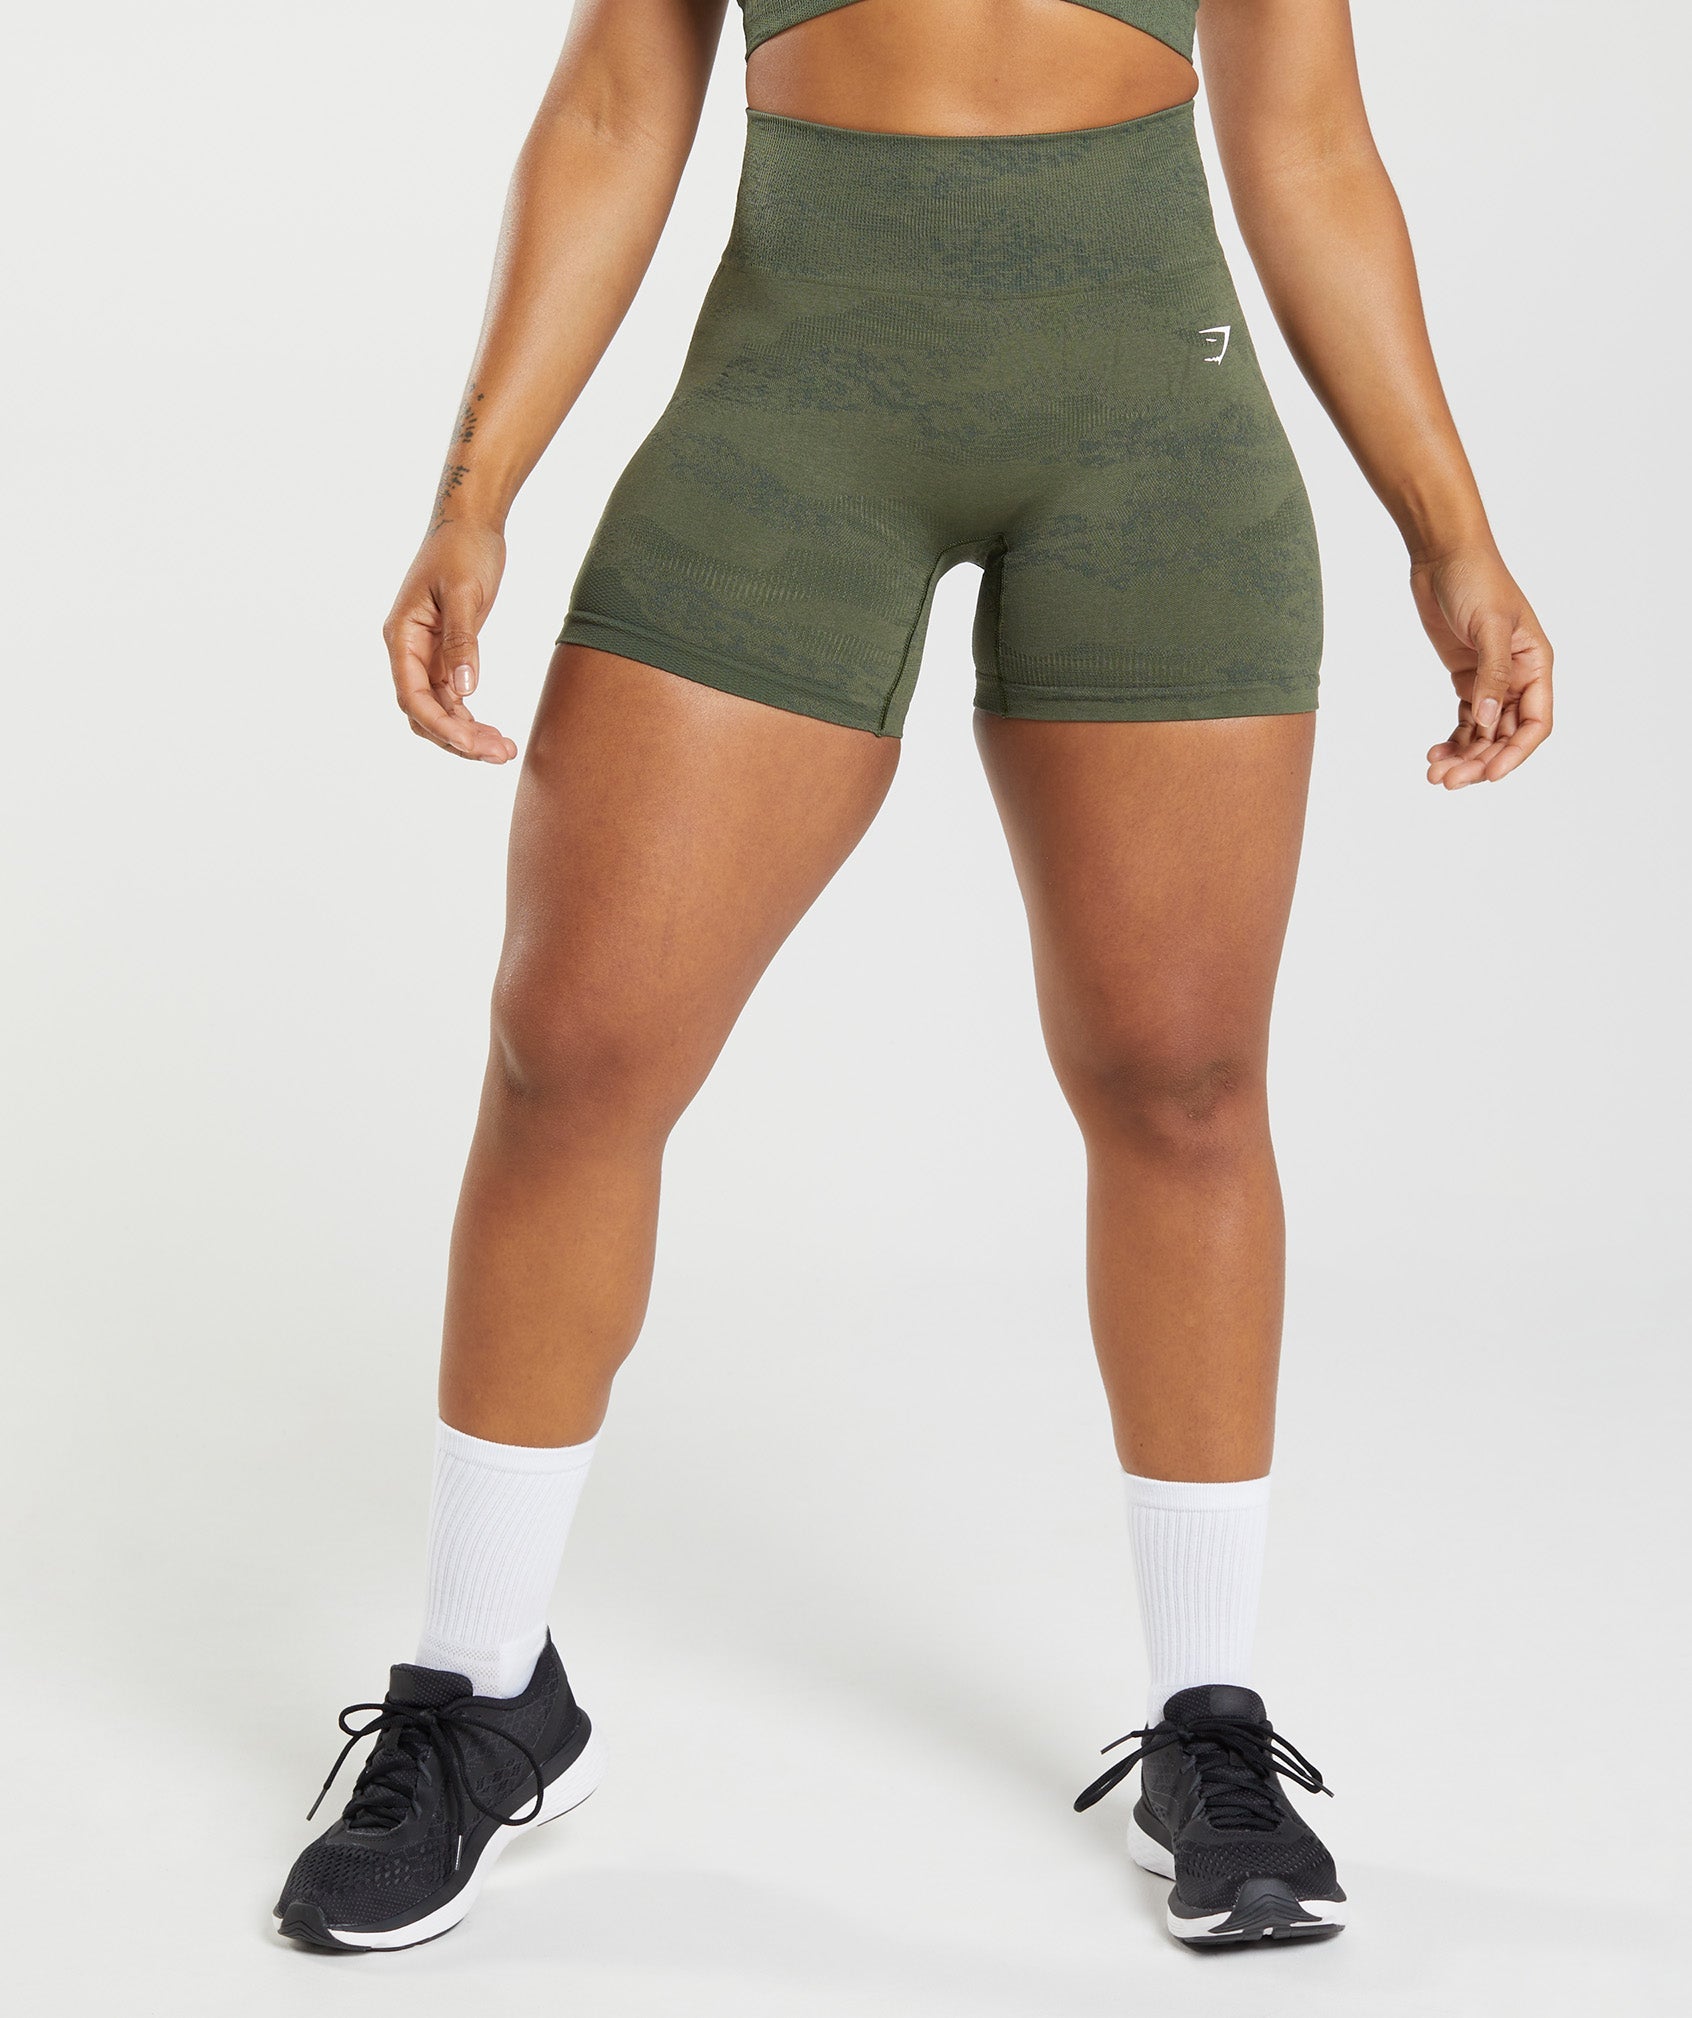 Adapt Camo Seamless Camo Shorts Women Set For Women Racer Back Crop Top,  Gym Outfit For Summer Workouts And Yoga 210802 From Luo02, $11.5